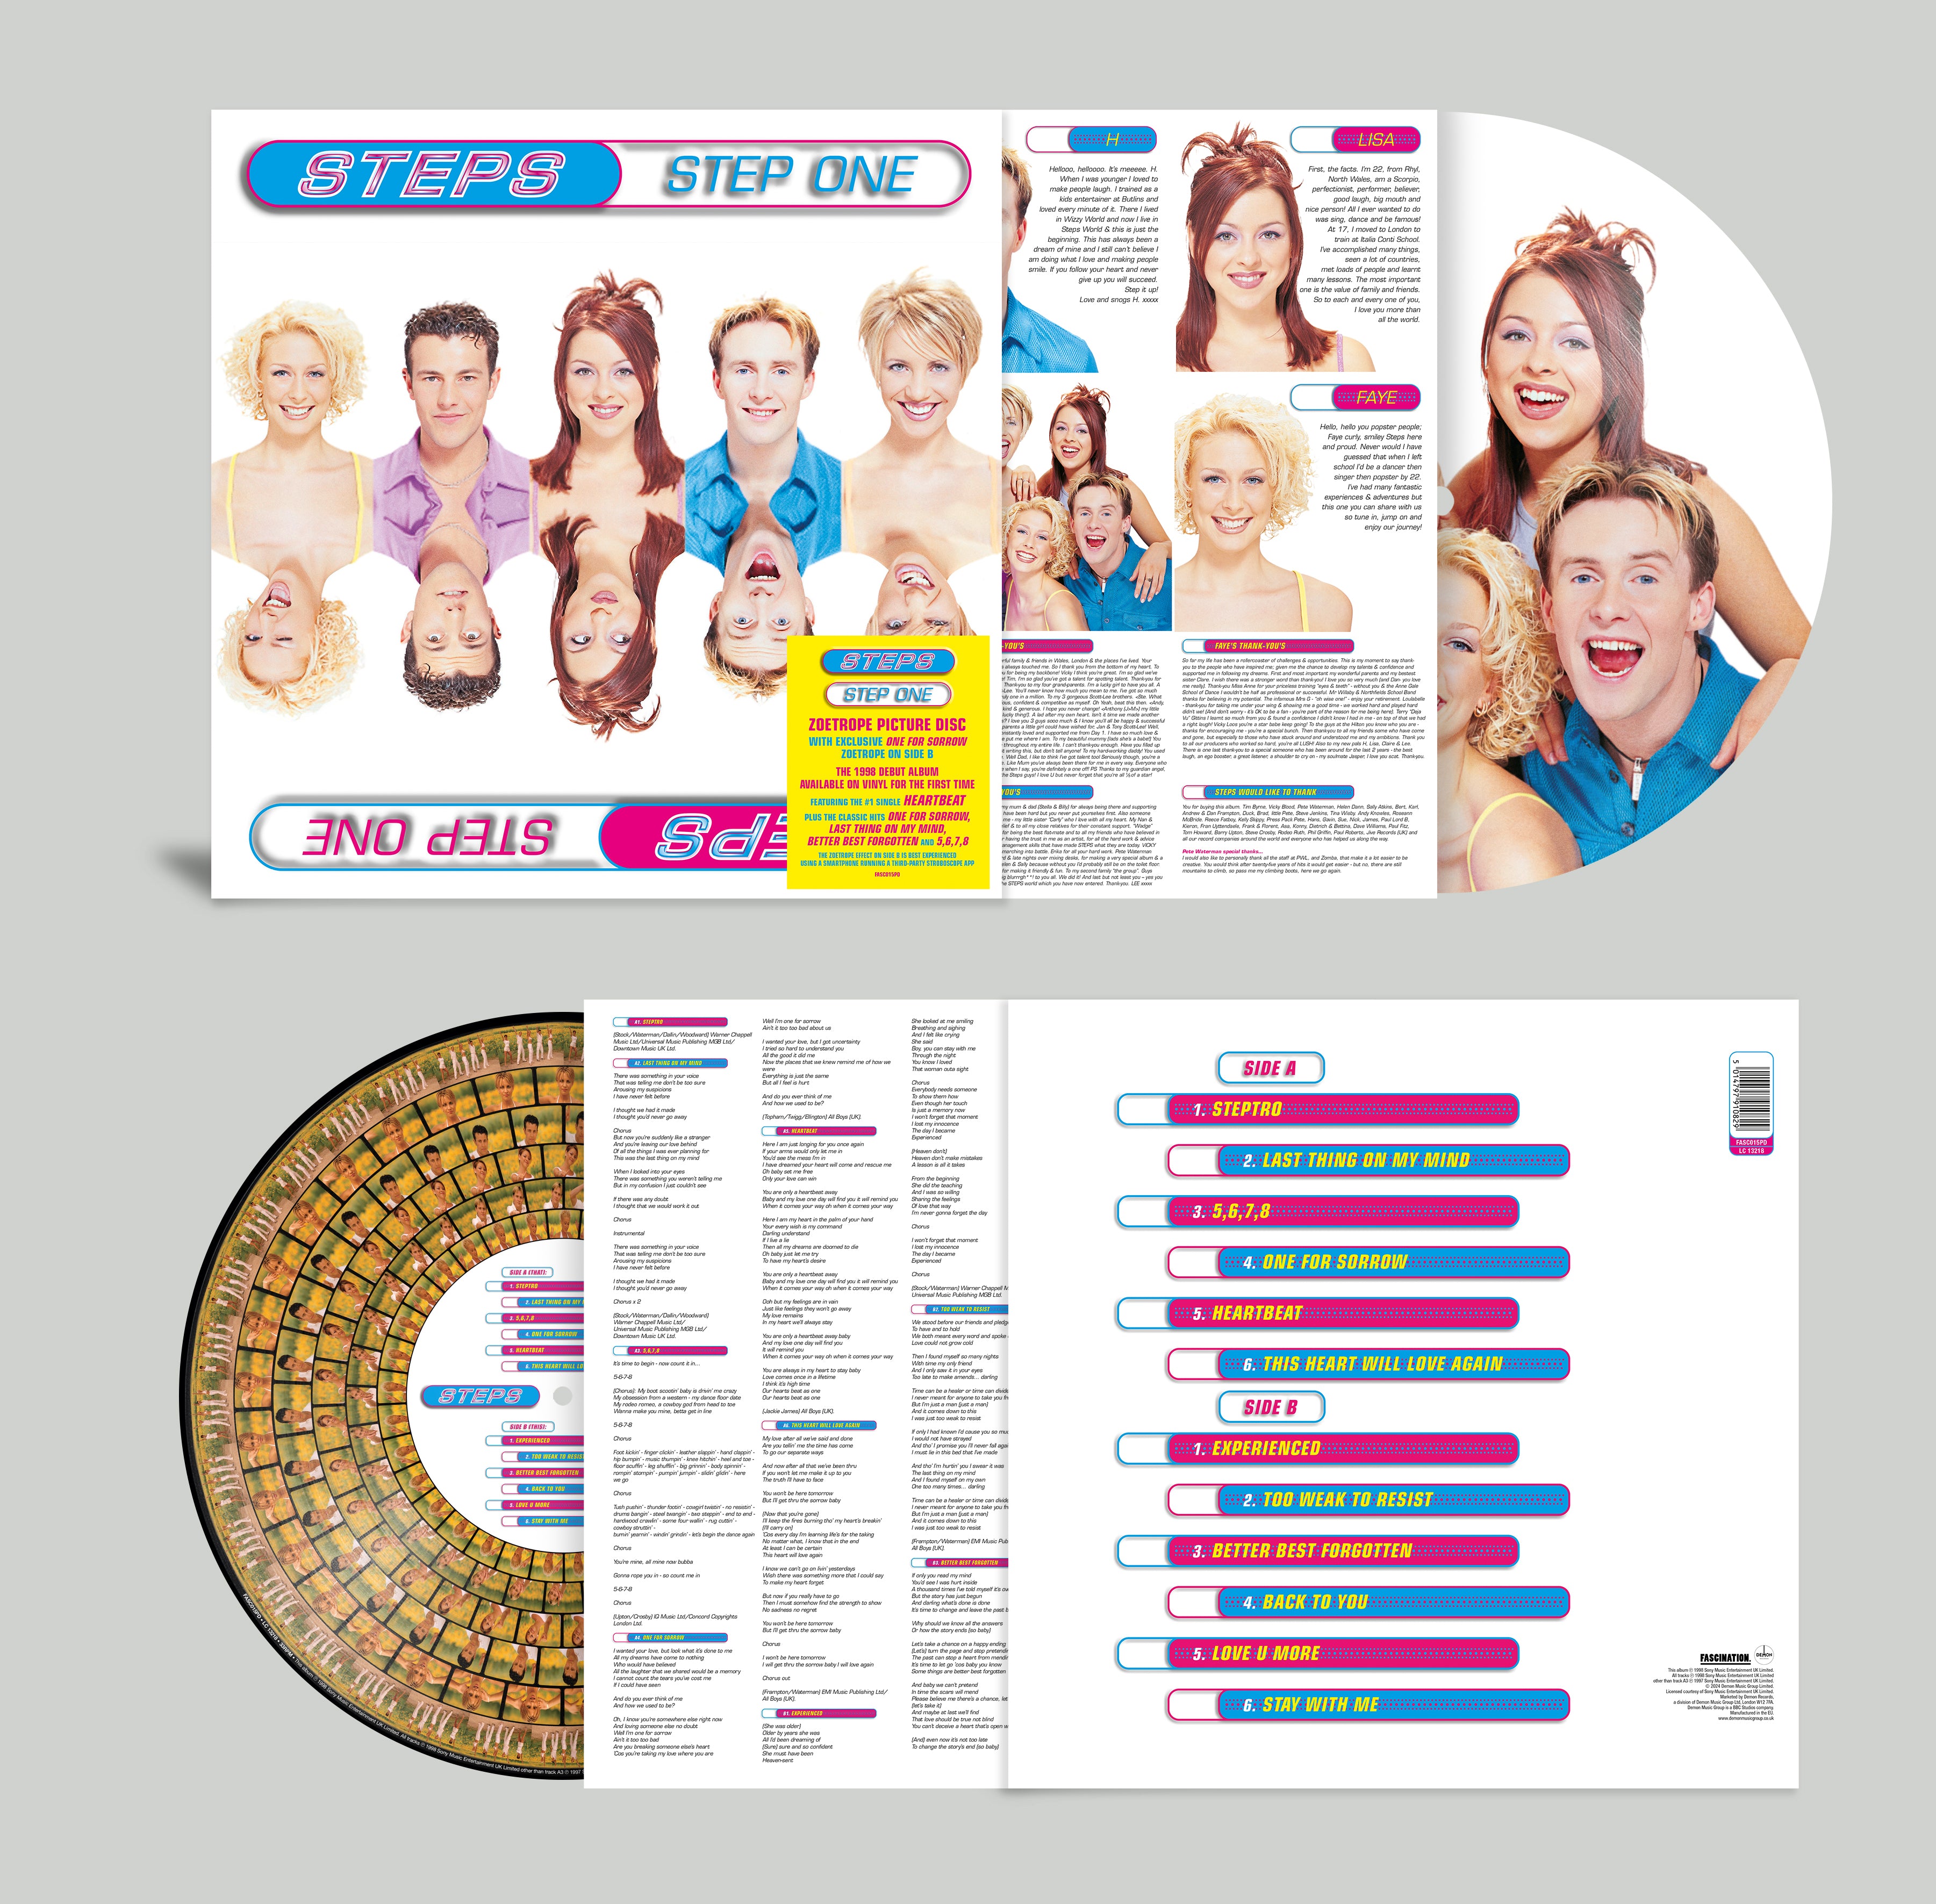 Steps - Step One: Limited Zoetrope Picture Disc Vinyl LP